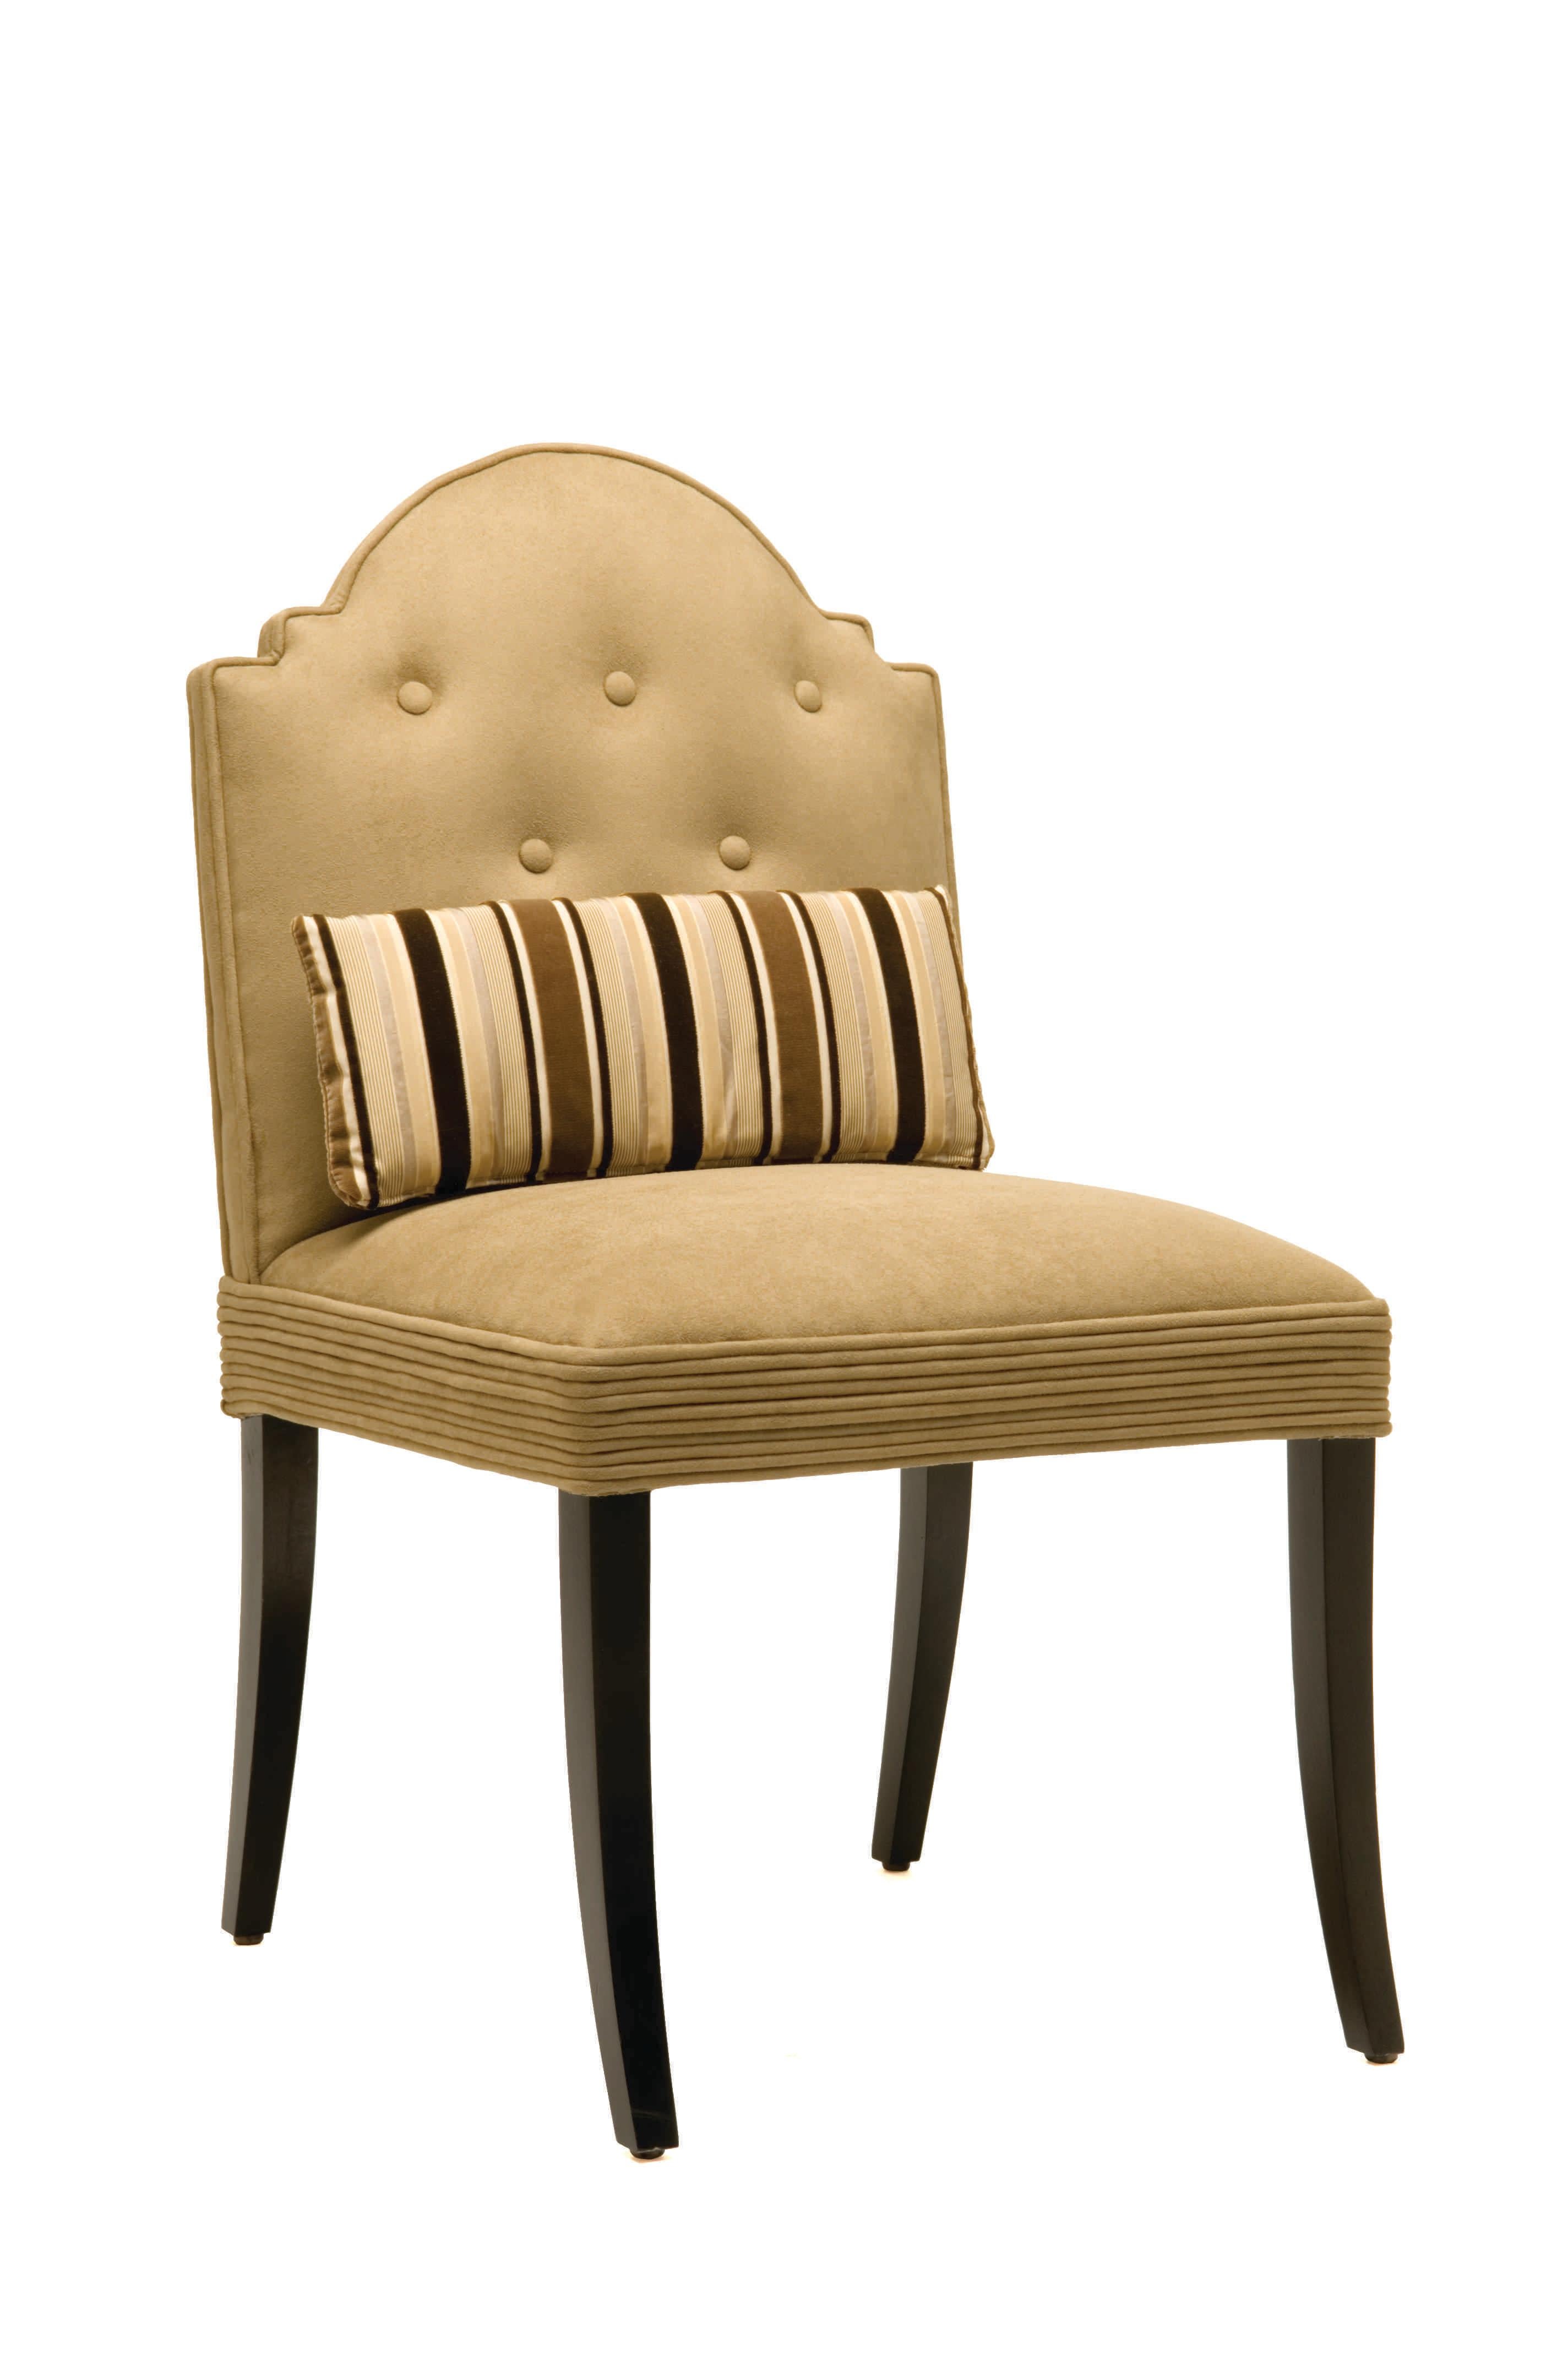 A hand-crafted tailored side chair inspired by the neo-classical movement of the 1940s. multiples welts are applied around the seat, contrast welts can be specified , also custom sizes and finishes available.

